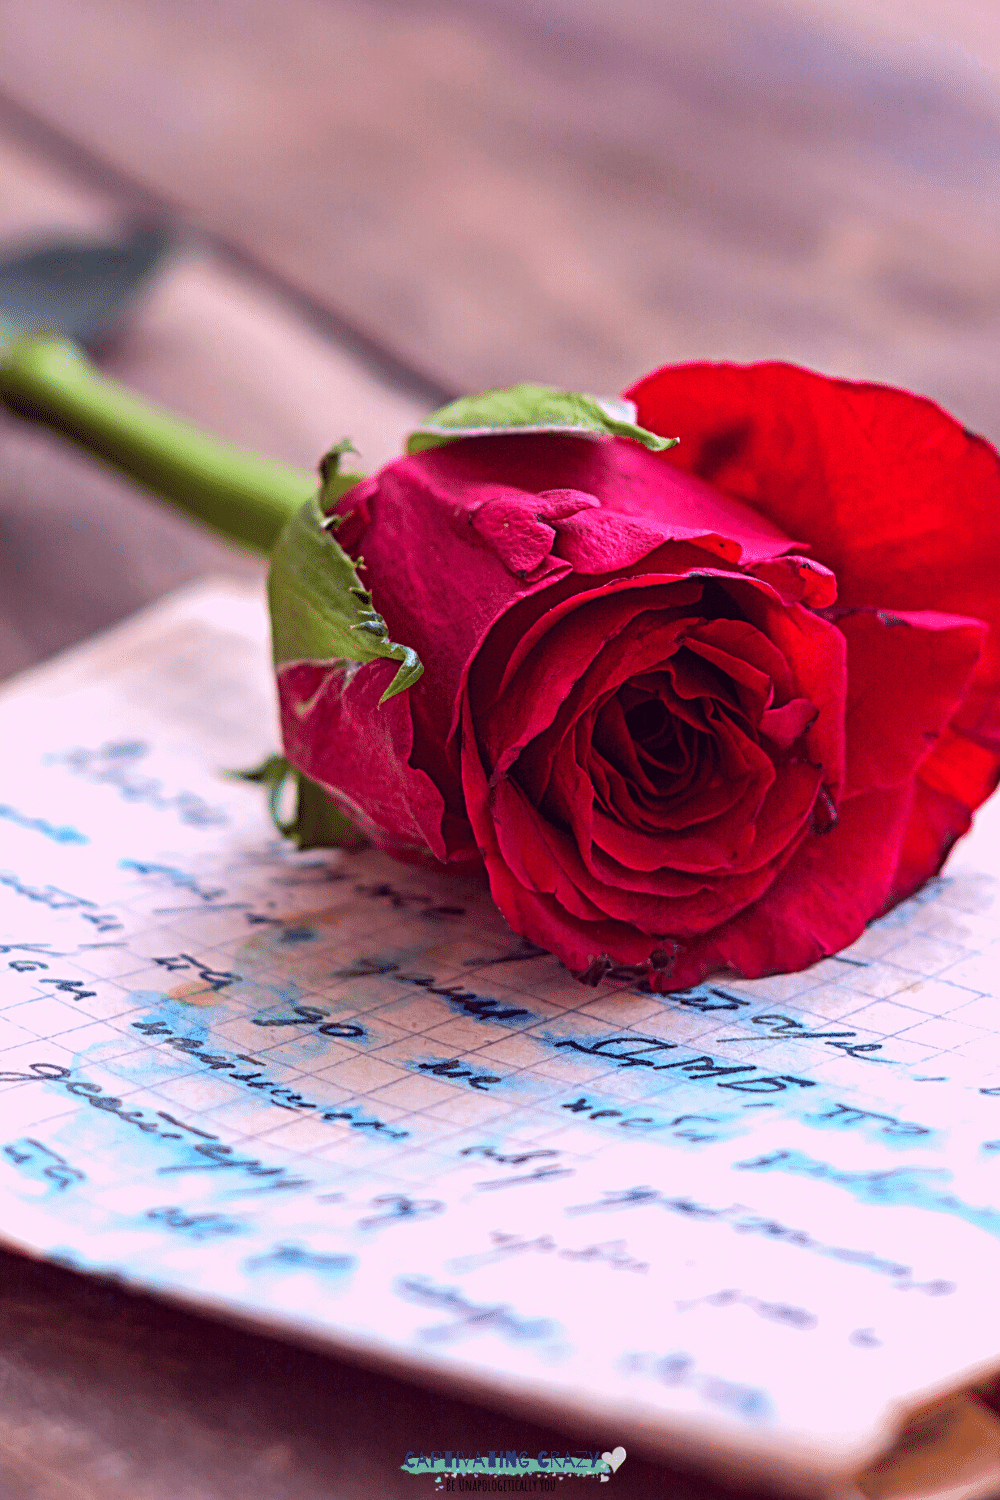 a love letter topped with a beautiful red rose